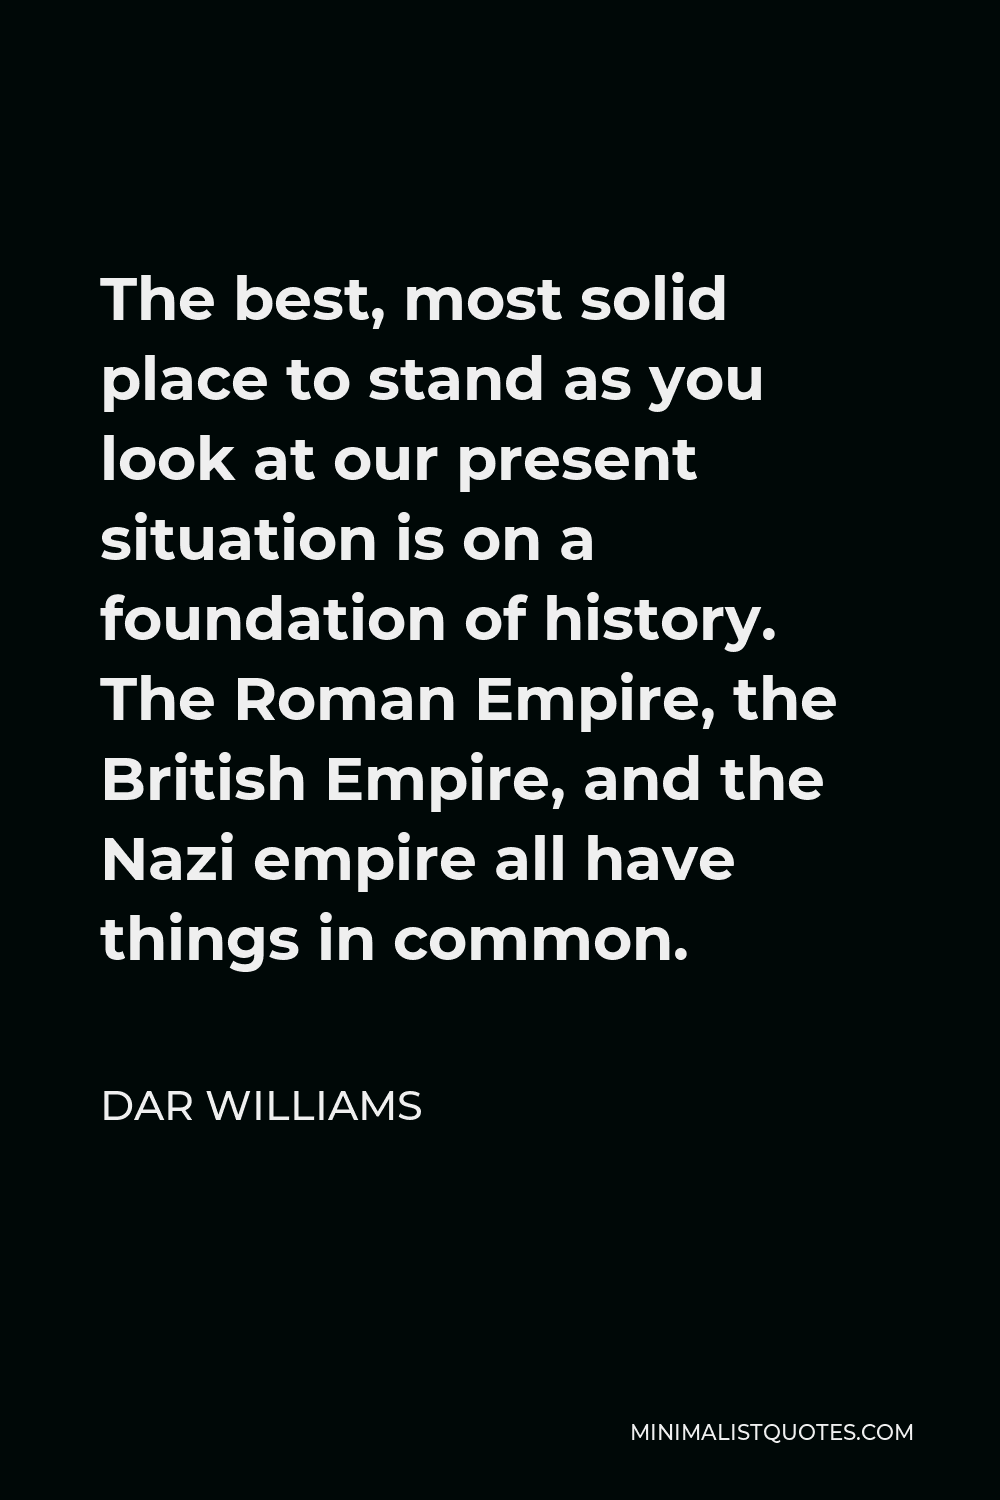 Dar Williams Quote - The best, most solid place to stand as you look at our present situation is on a foundation of history. The Roman Empire, the British Empire, and the Nazi empire all have things in common.